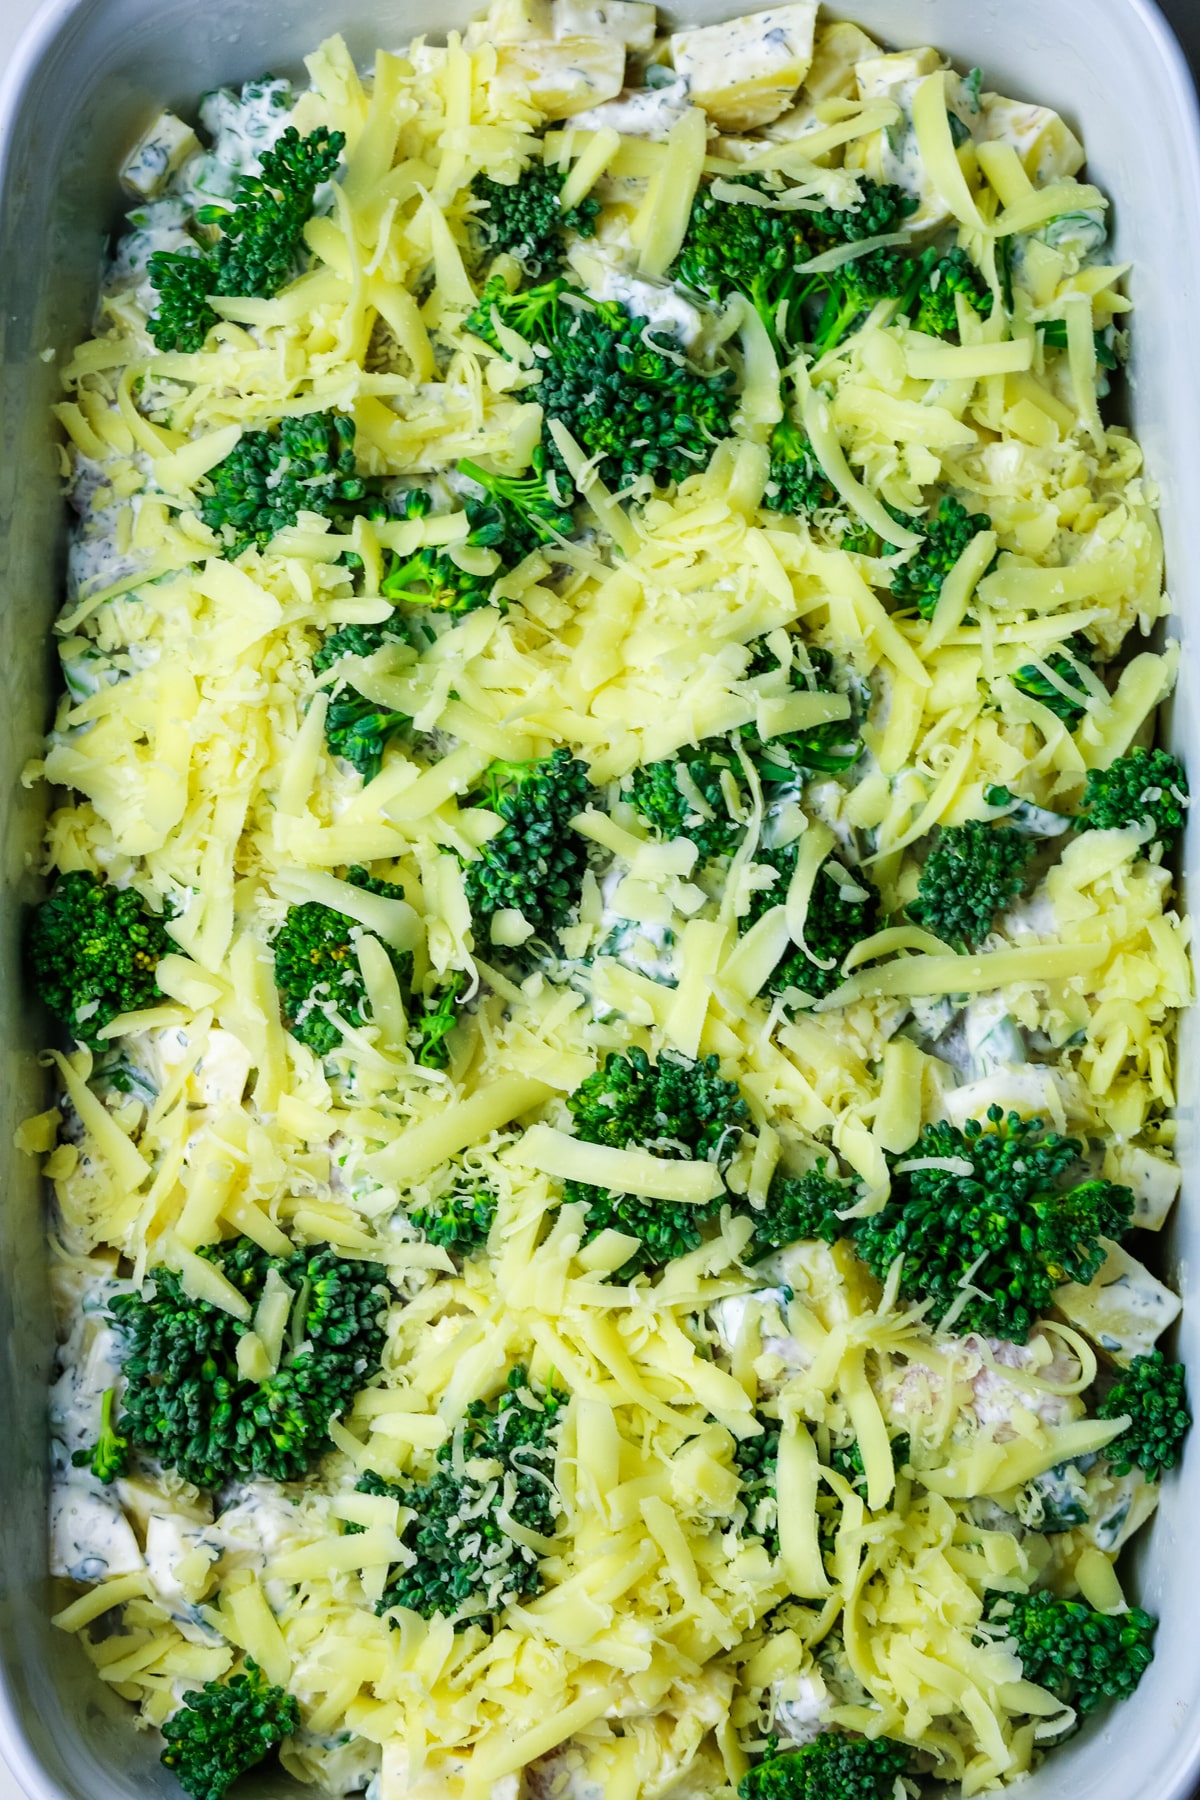 freshly grated cheese and raw broccoli florets on top of a casserole in a white baking dish.